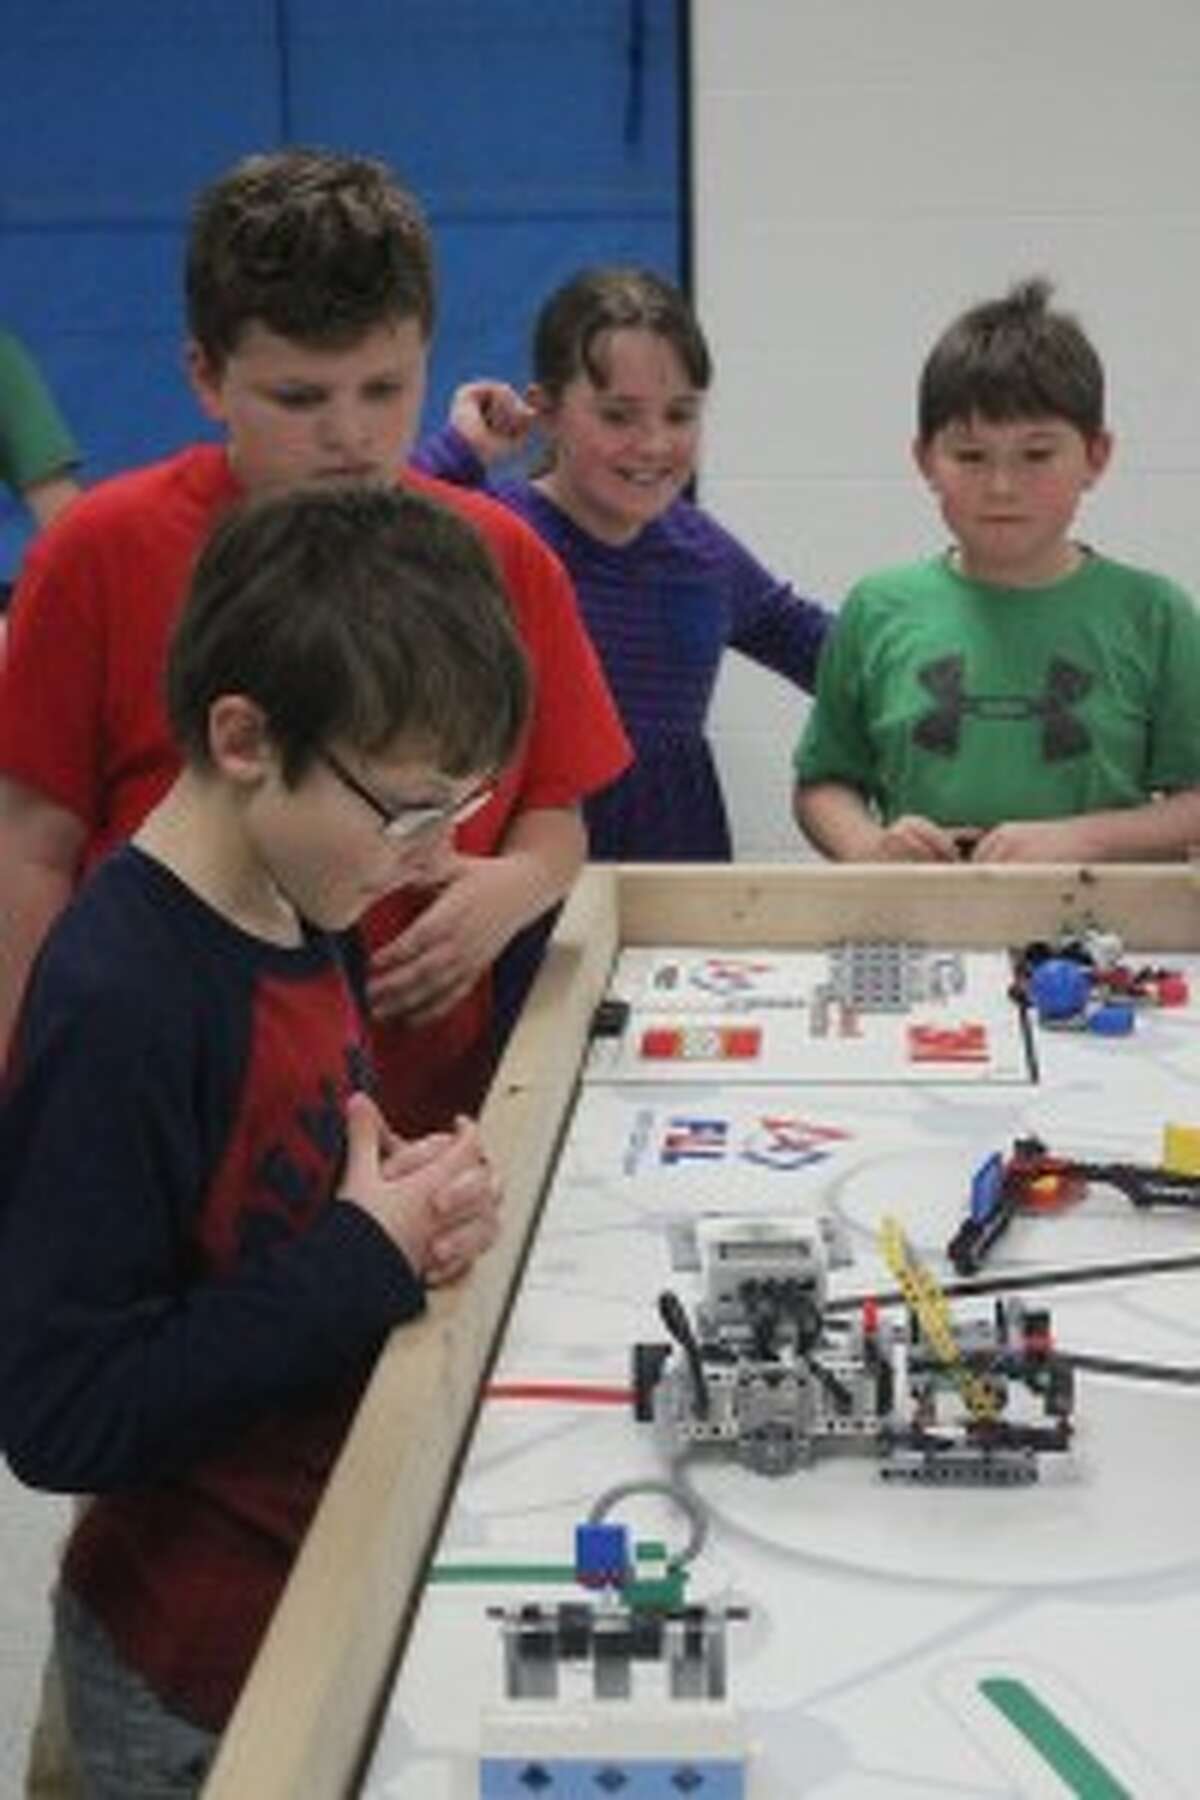 HARD WORK PAY OFF: Platte River students watch their hard work pay off as the Lego machine they built and programmed preforms for family and friends at the Lego Team’s award celebration night. (Photo/Bryan Warrick)